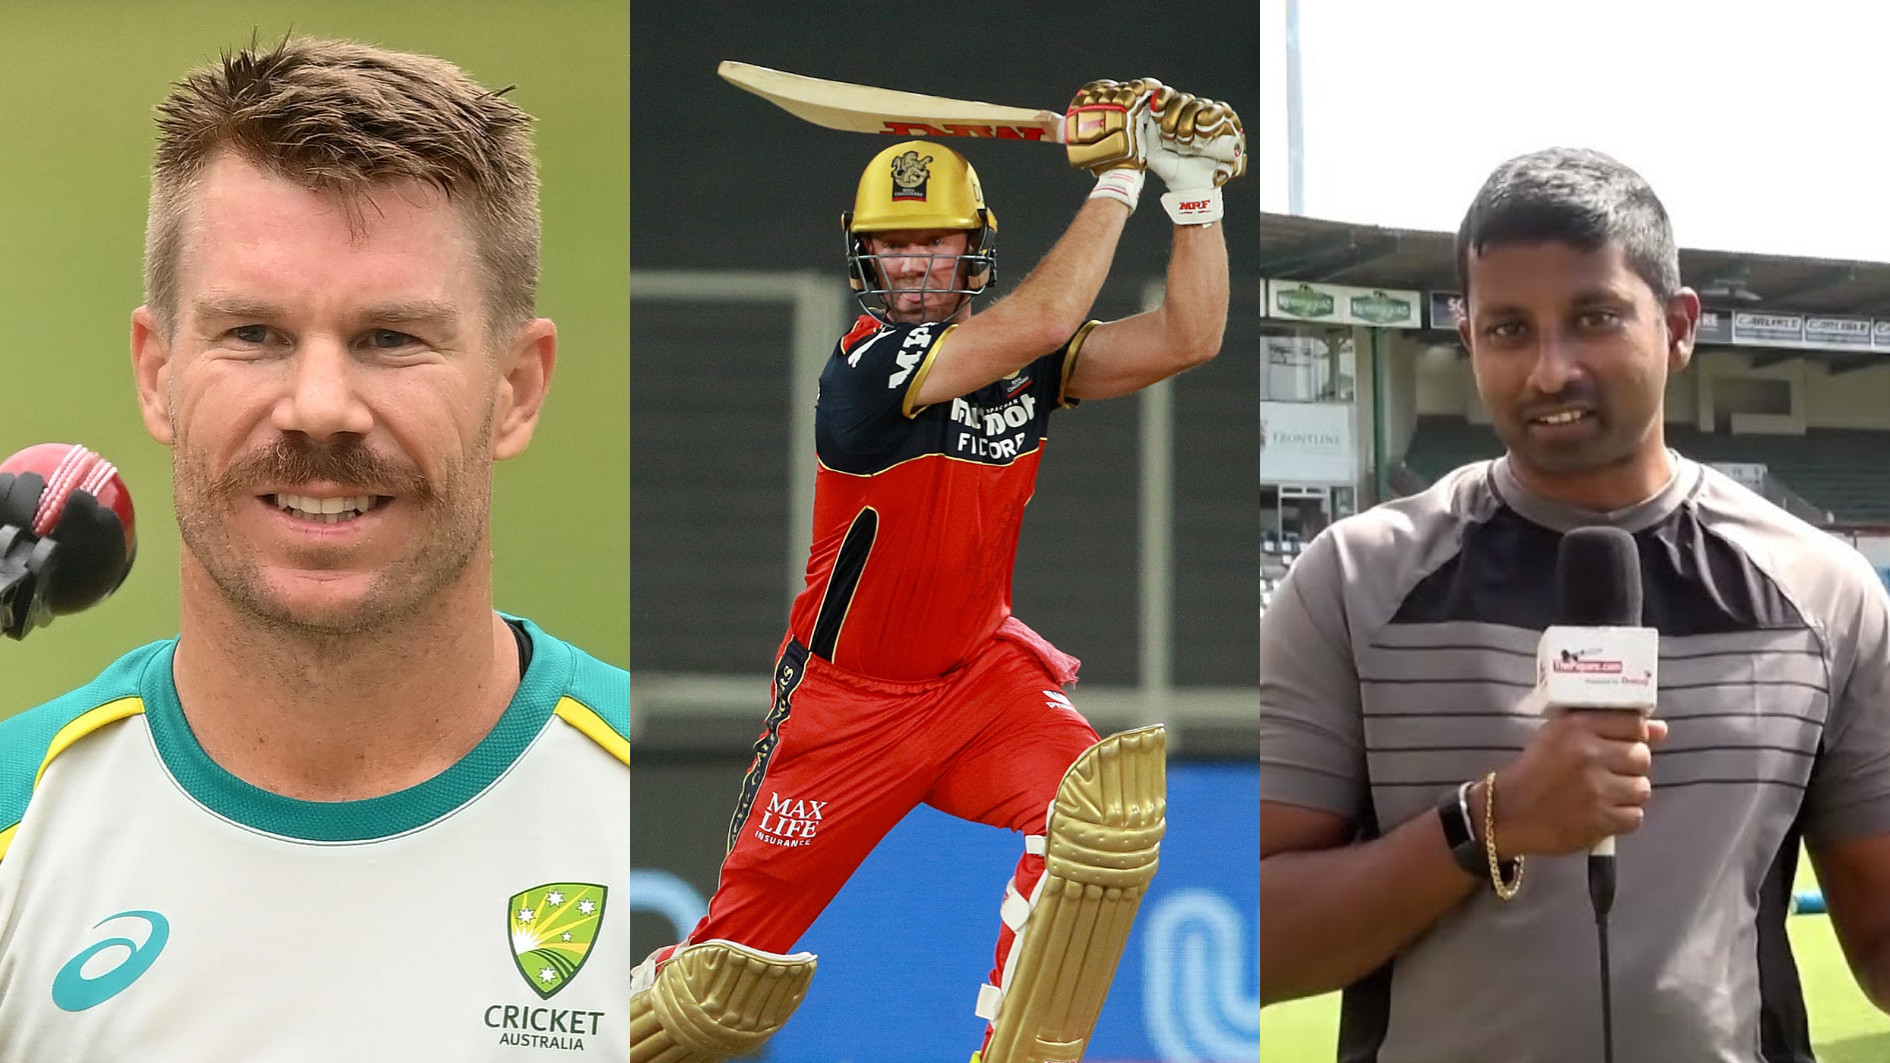 IPL 2021: Cricket fraternity lauds AB de Villiers’ magical 75* as RCB make 171/5